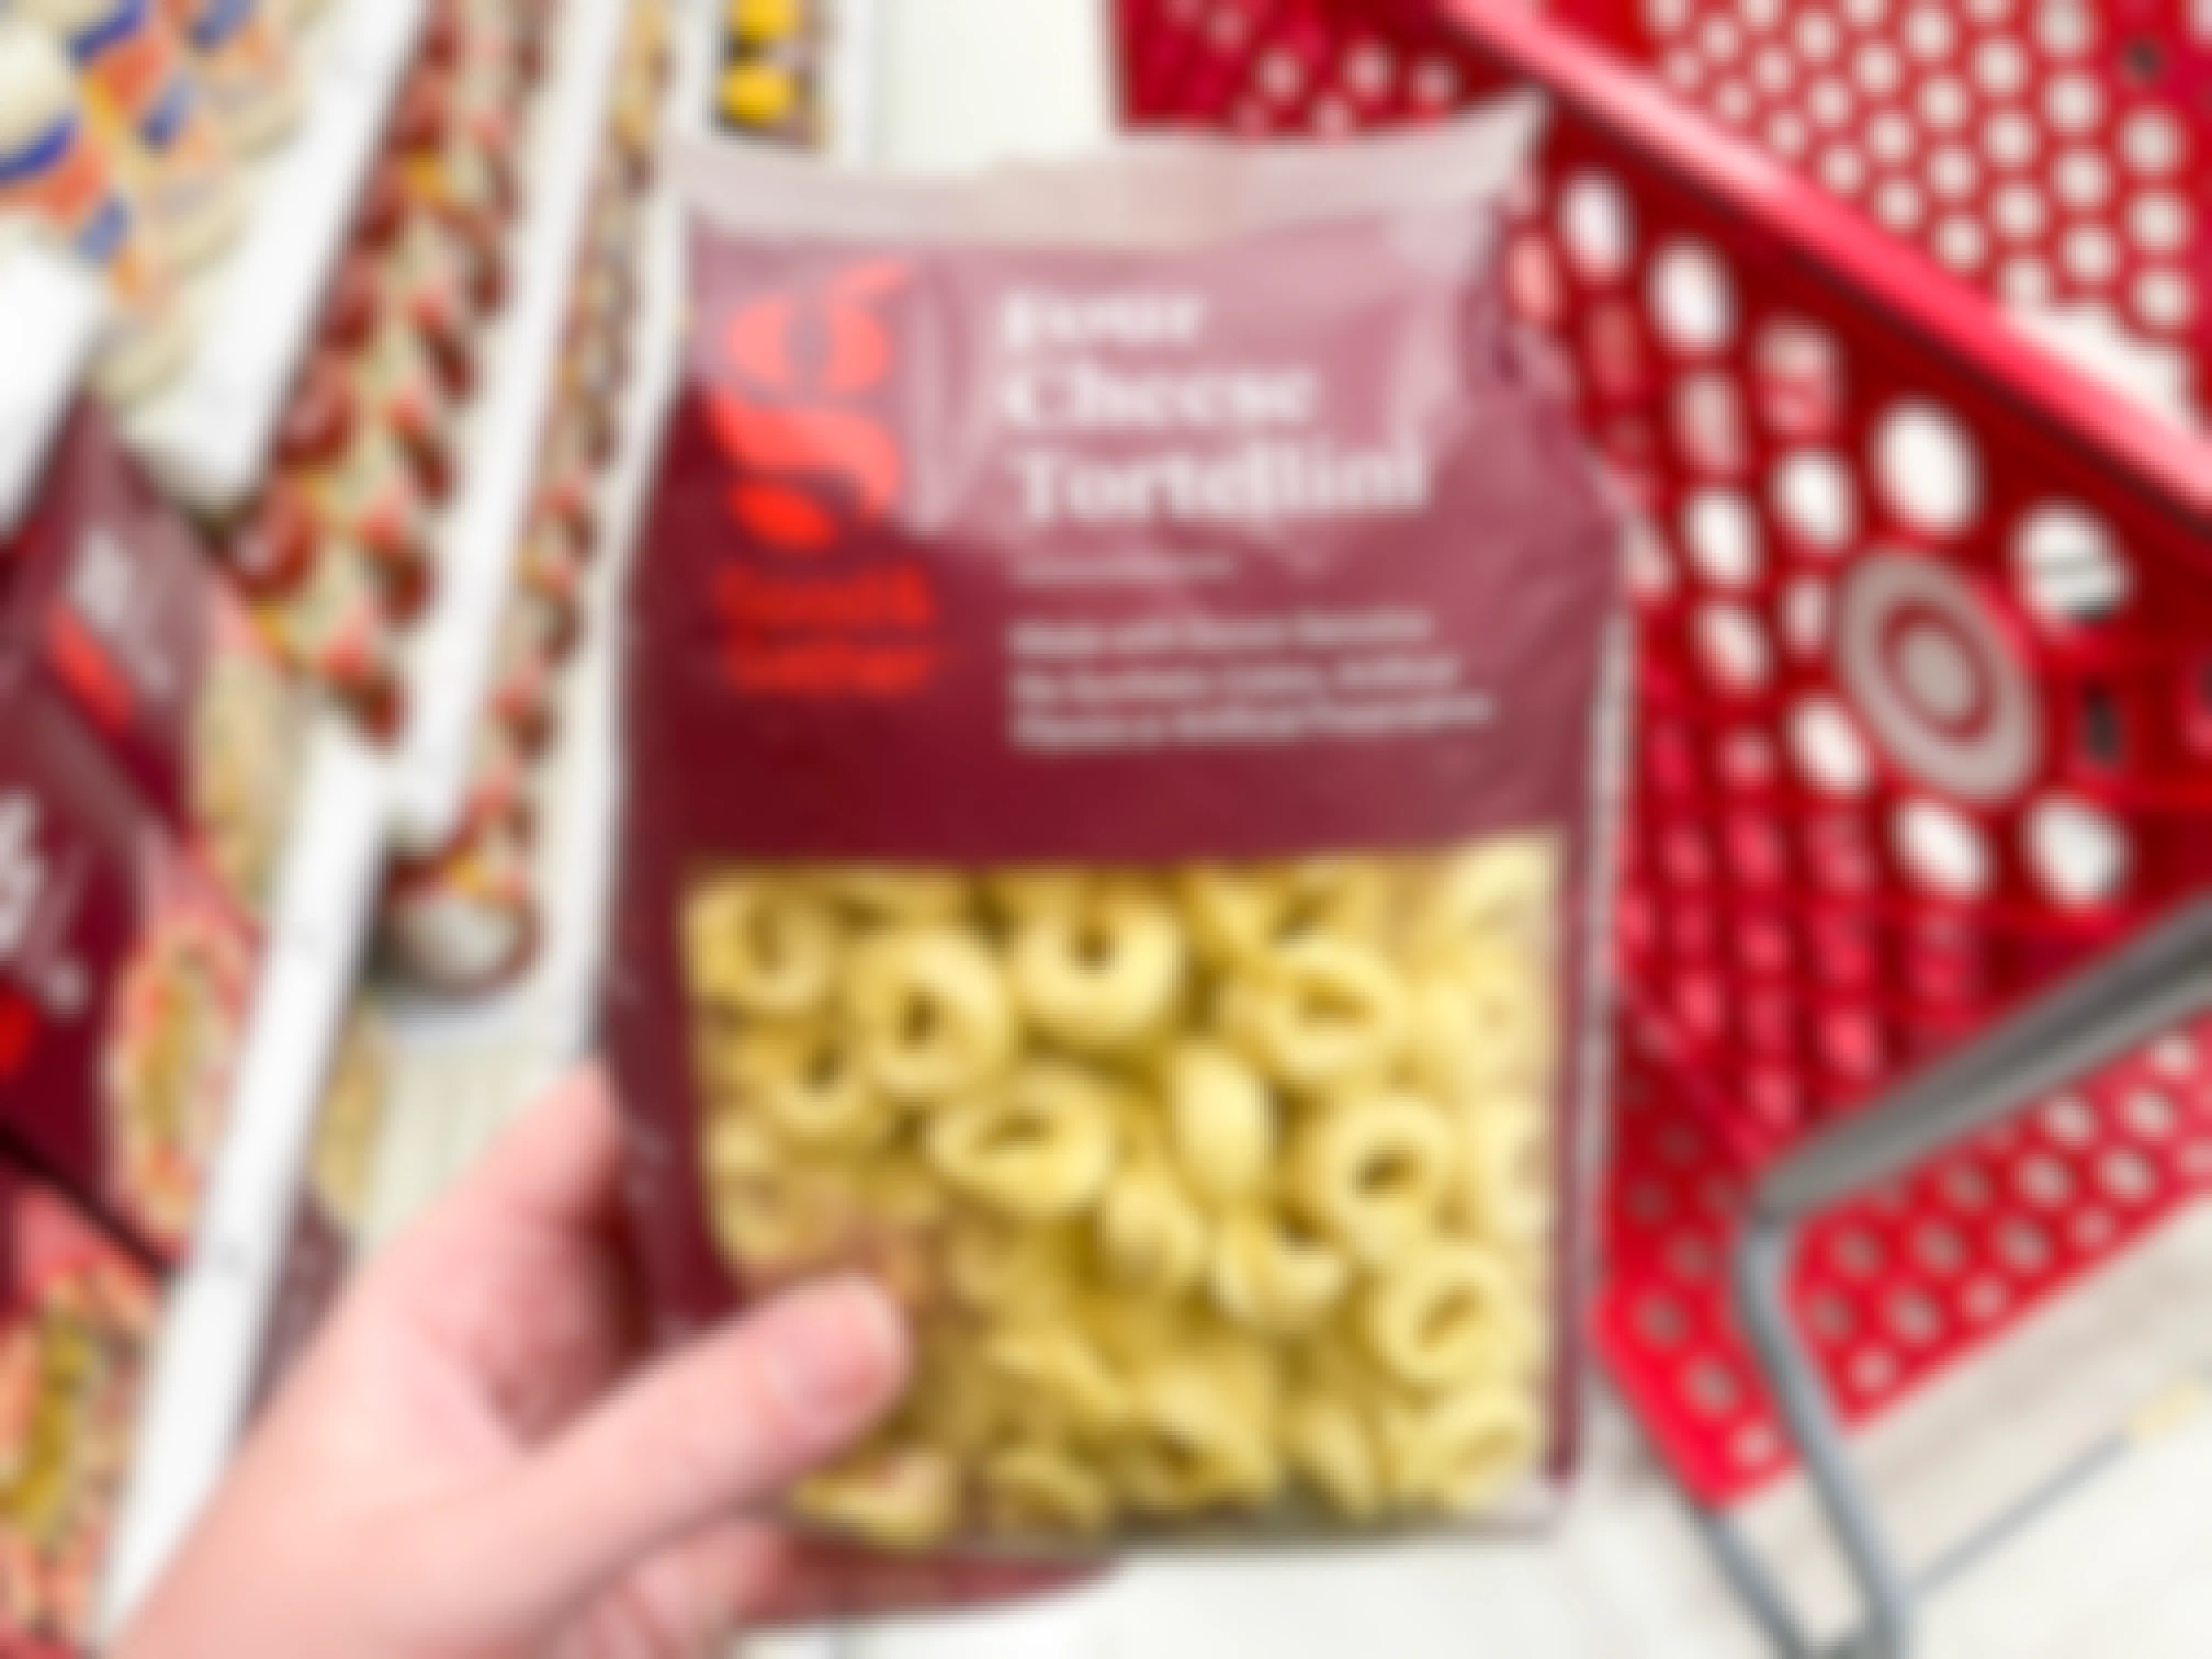 A person holding a package of Good and Gather tortellini, on the pasta aisle inside Target